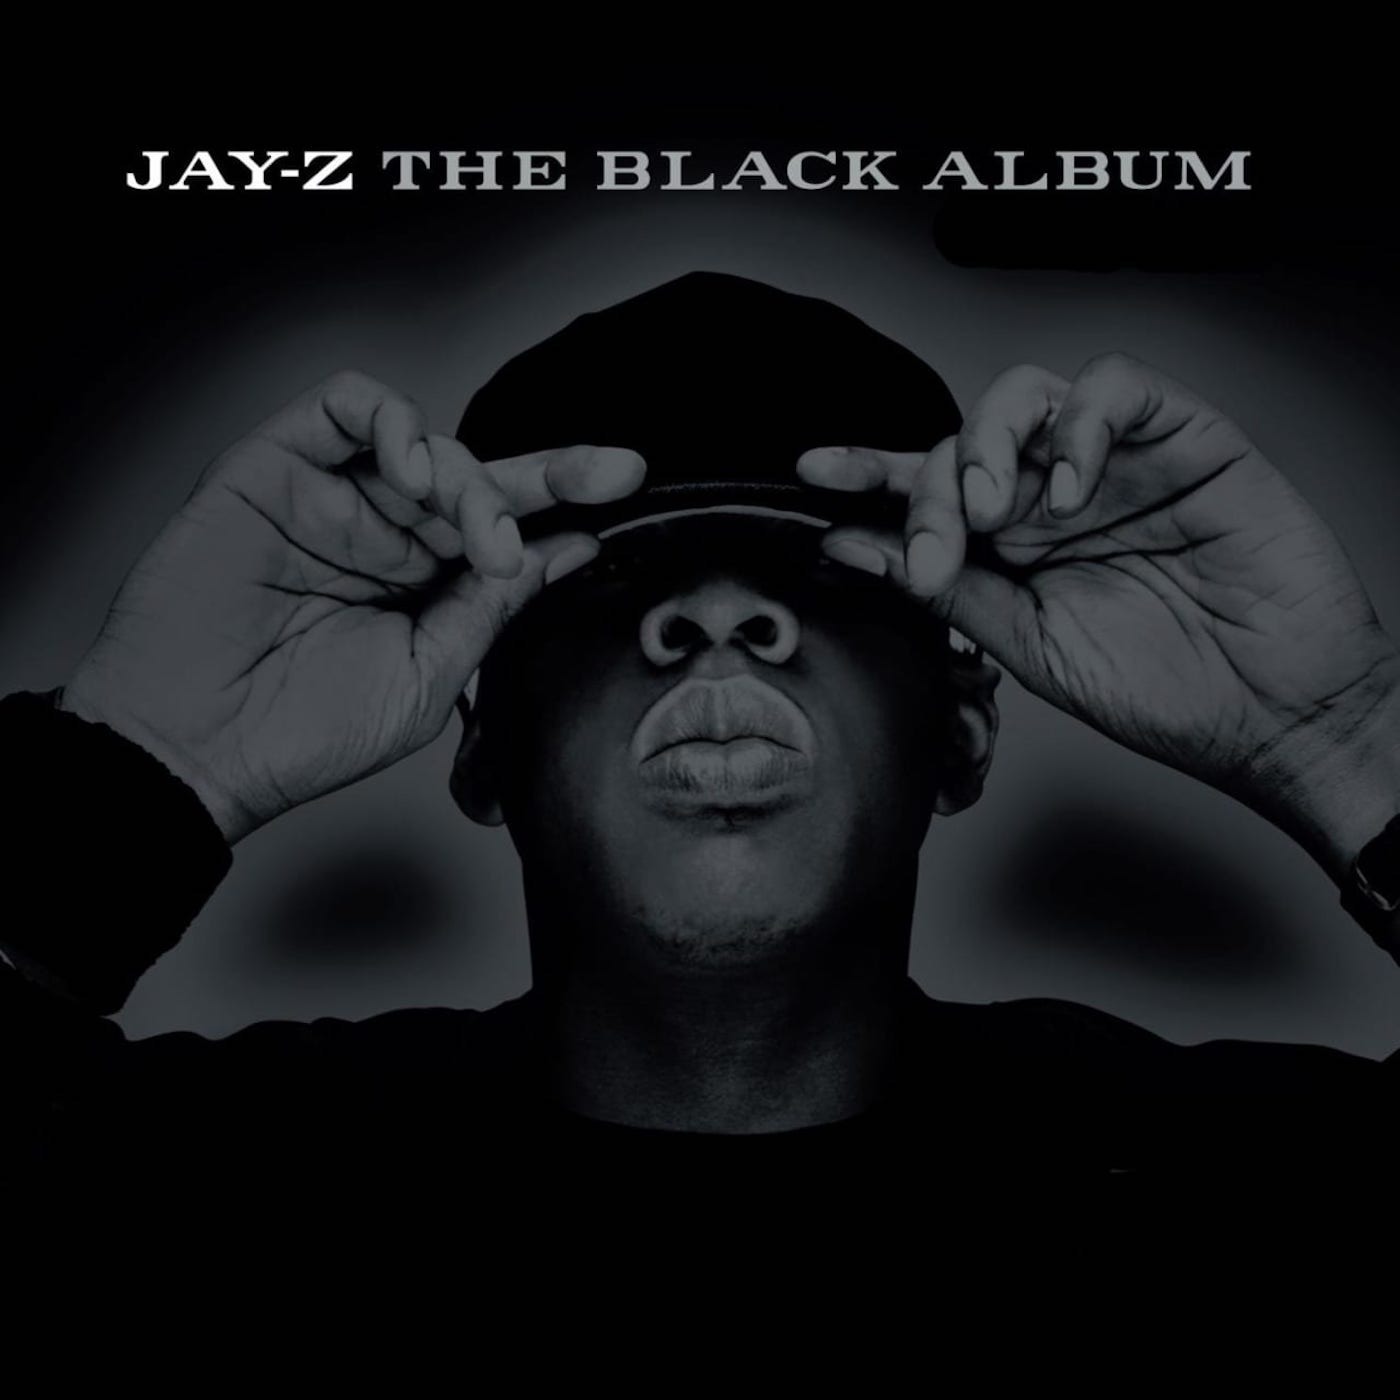 Jay-Z: The Black Album (2003). "On that note, I'm leavin' after this song"